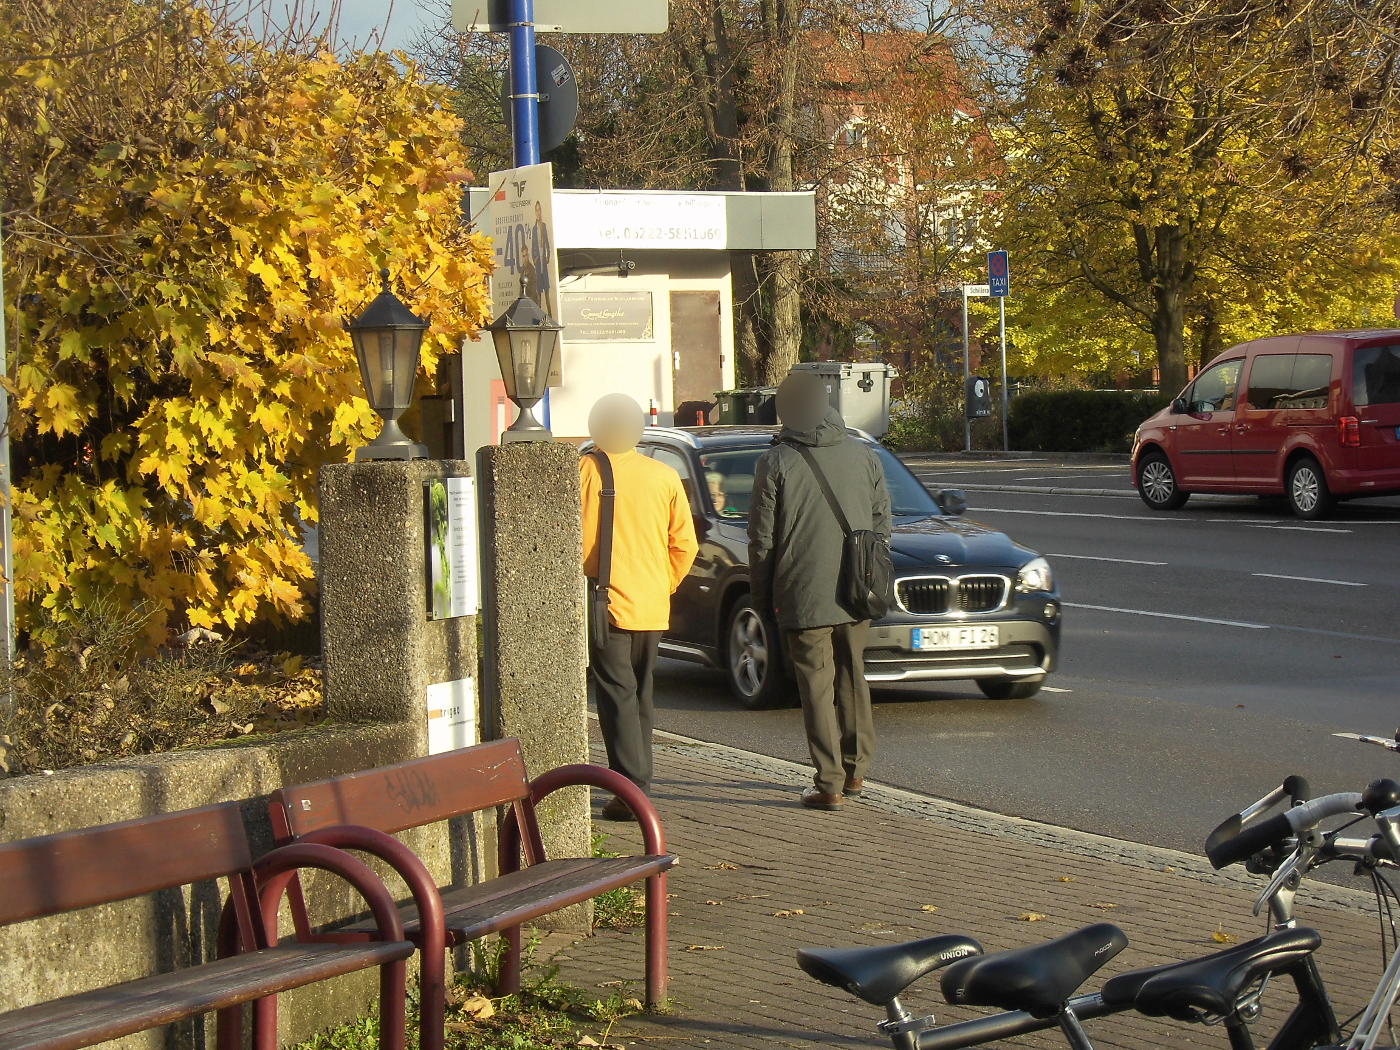 Jehovah's Witnesses in Wiesloch either helpless or bored ignorant